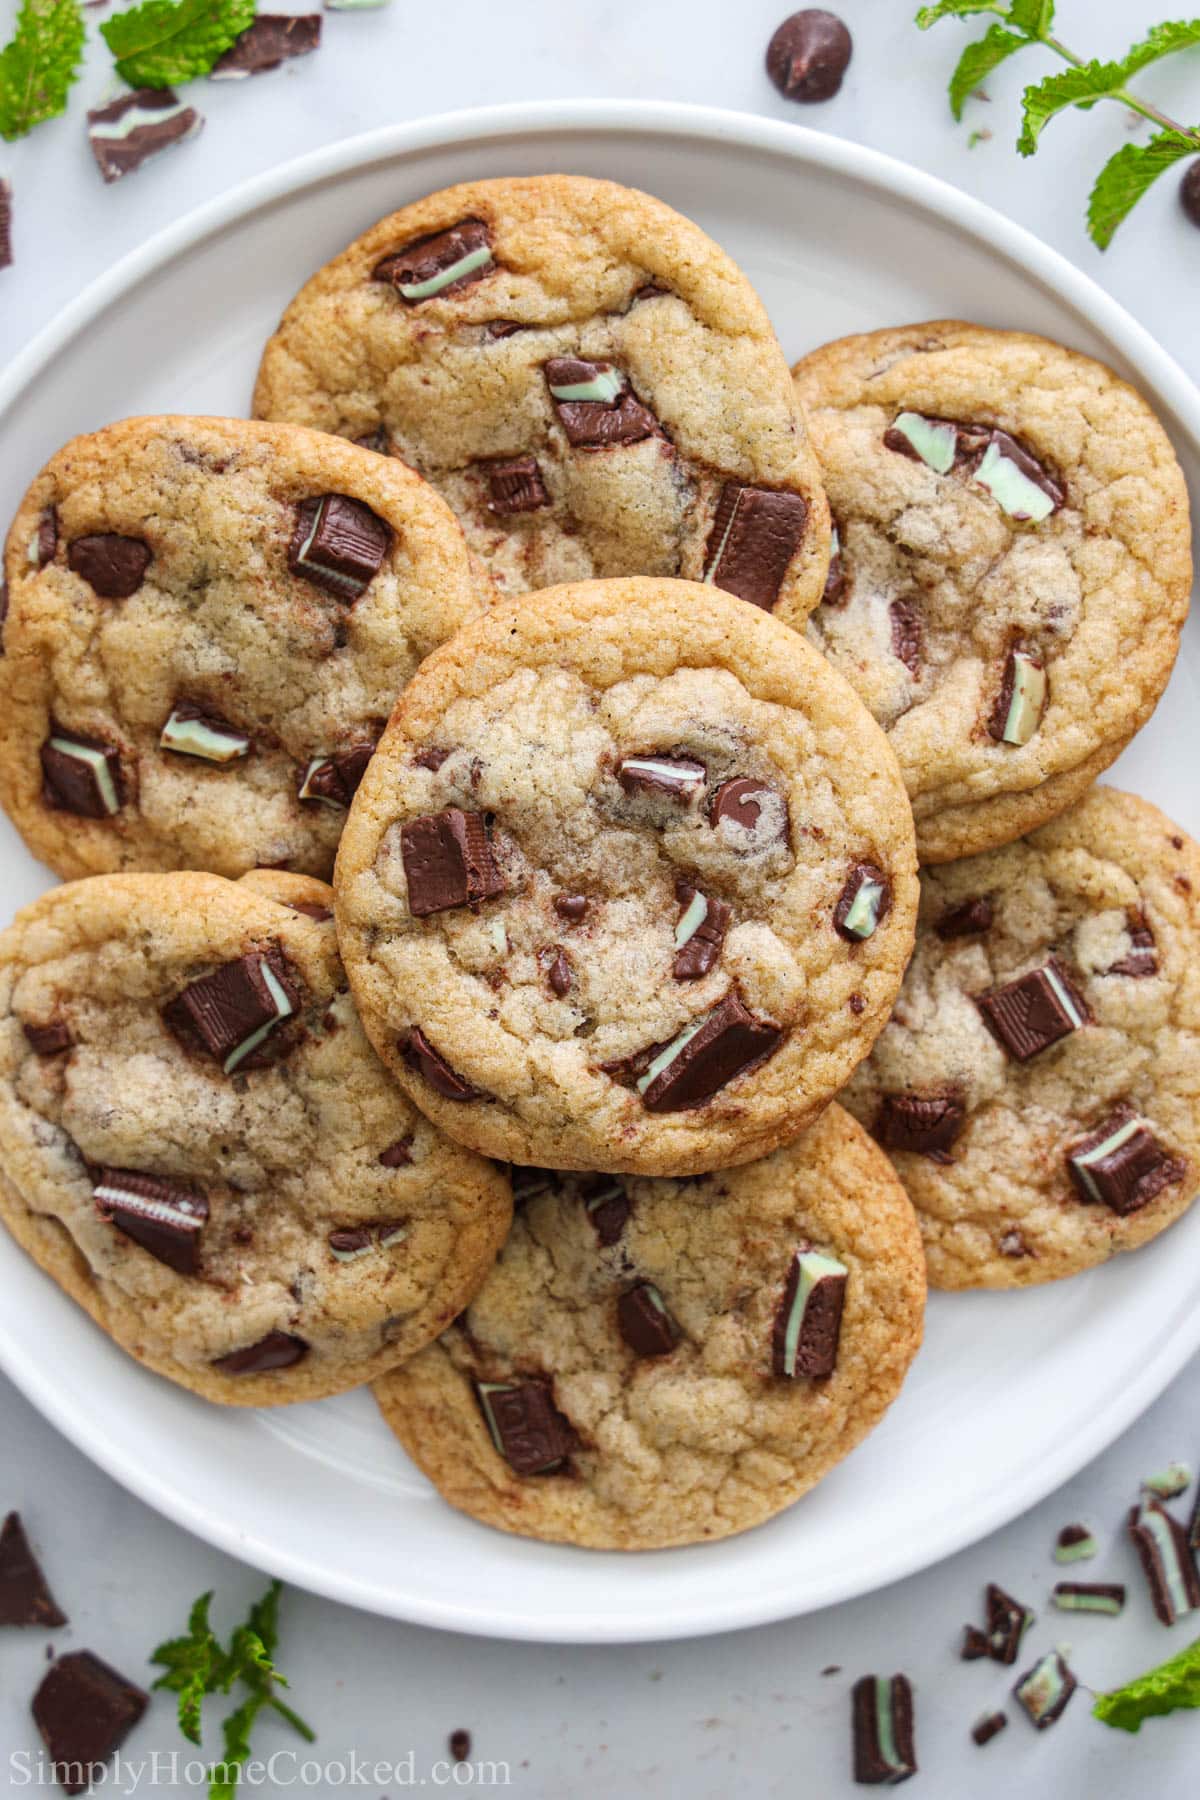 Vertical image of a plate of Mint Chocolate Chip Cookies